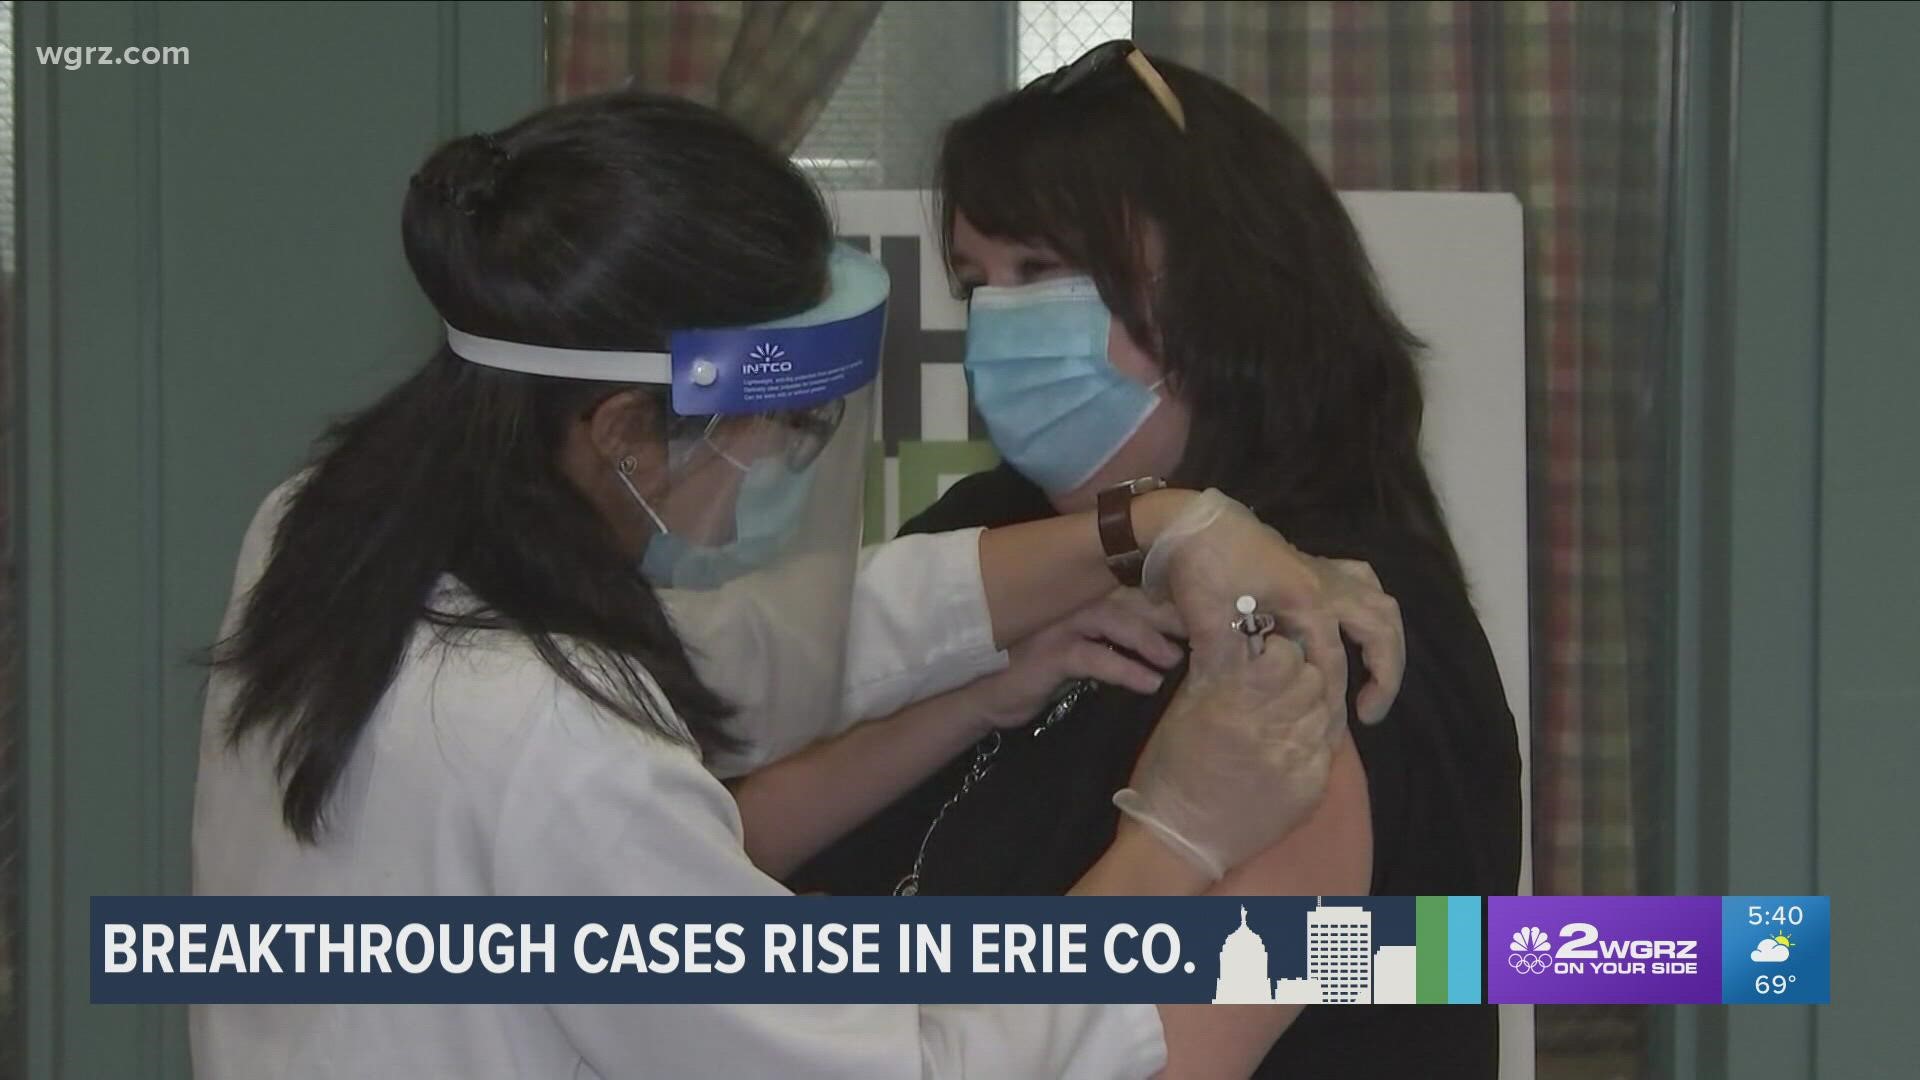 Breakthrough cases are on the rise in Erie County, according to University at Buffalo researchers and the county's health department.